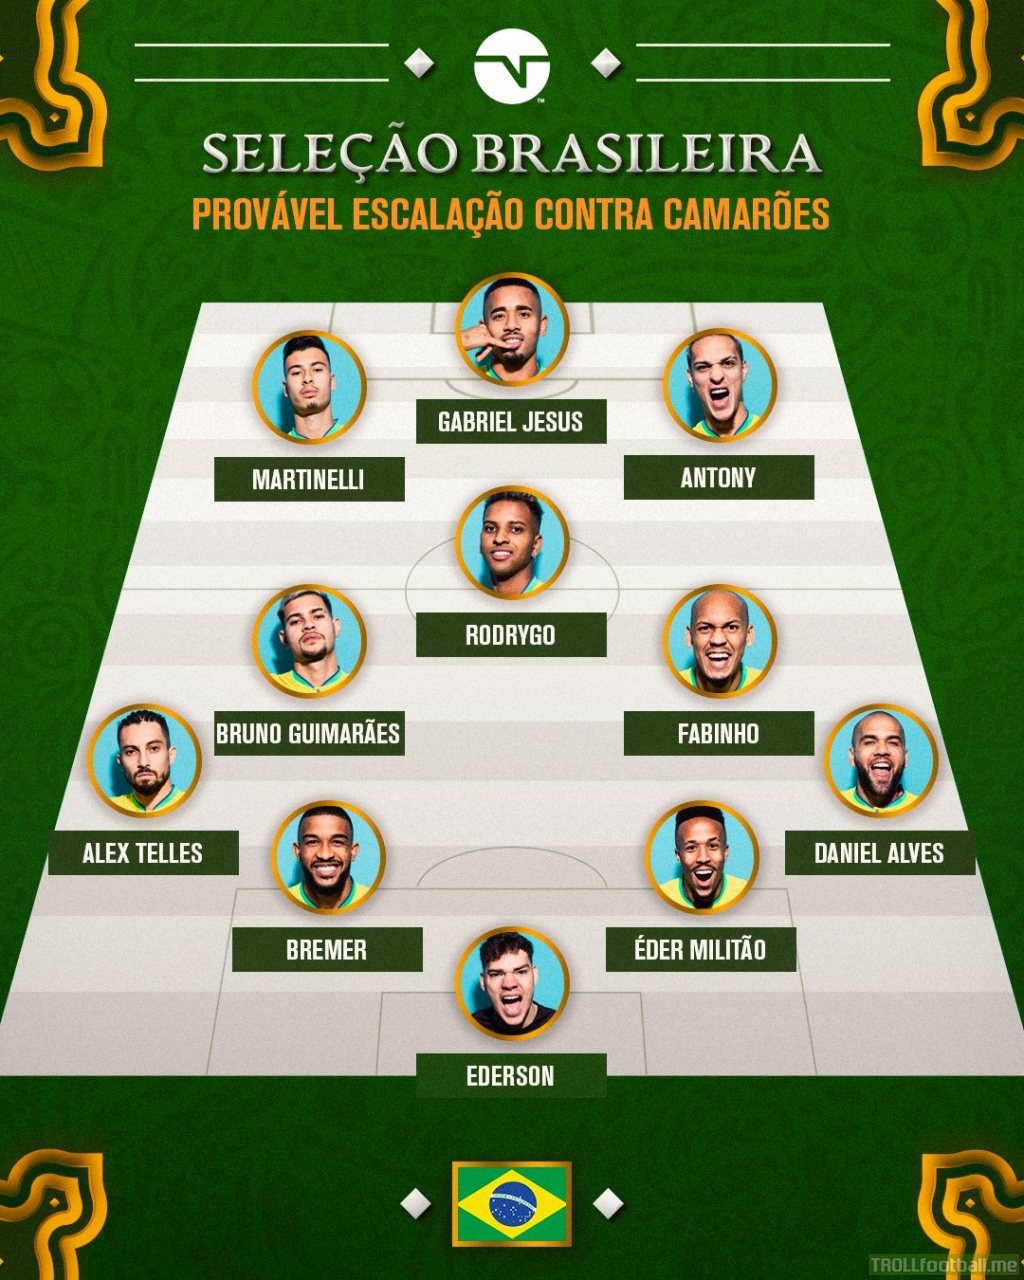 Brazil's team if Tite chooses to play with the substitutes against Cameroon.